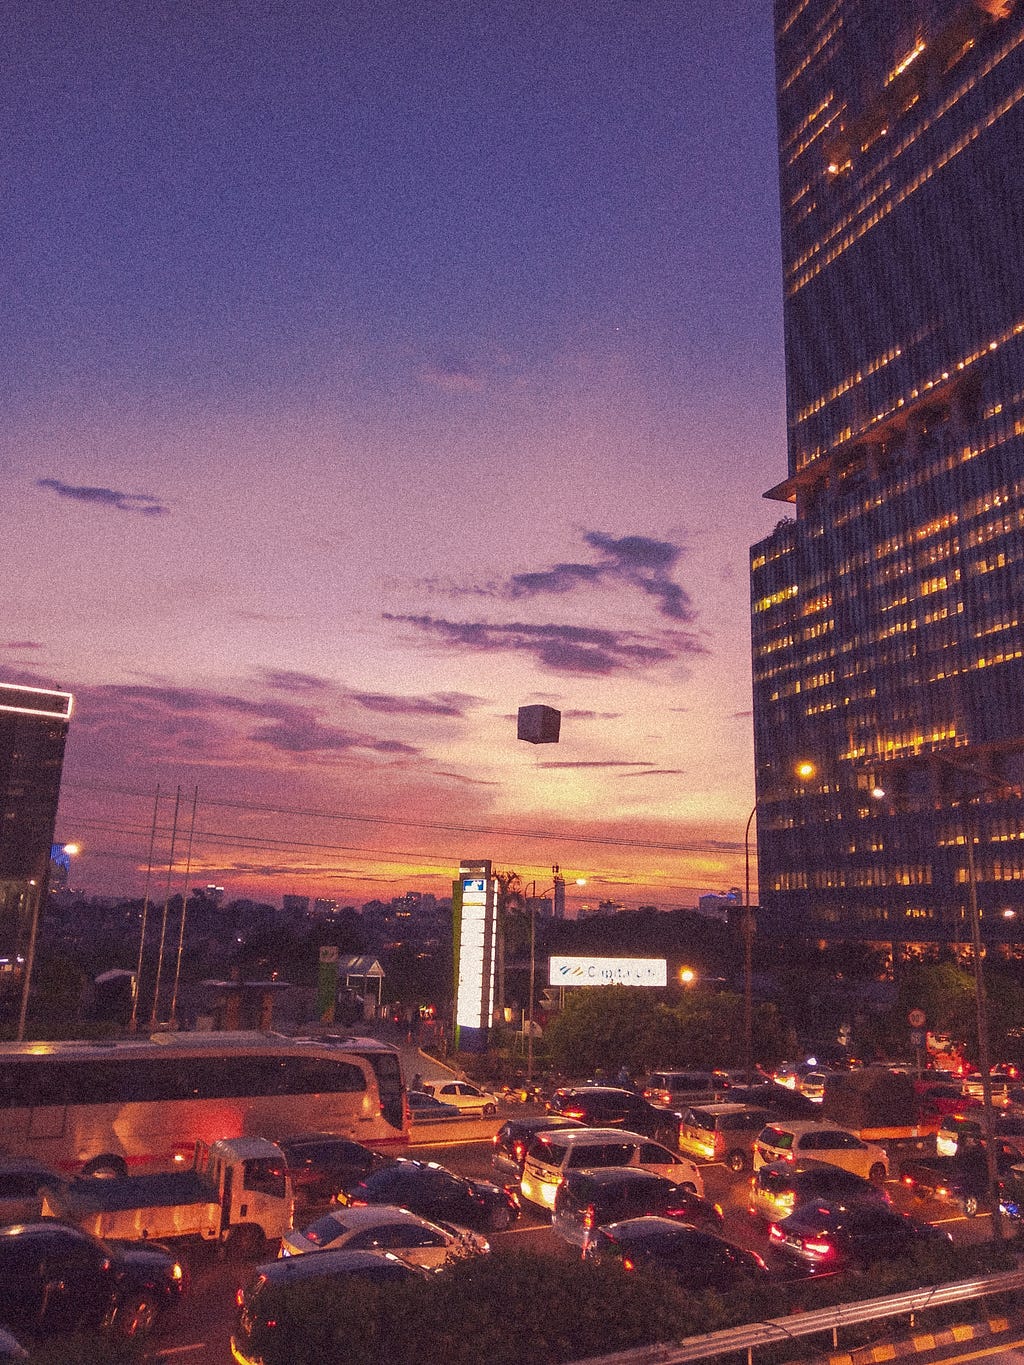 A glimpse of an afternoon city view with a pretty sunset sky in the background.